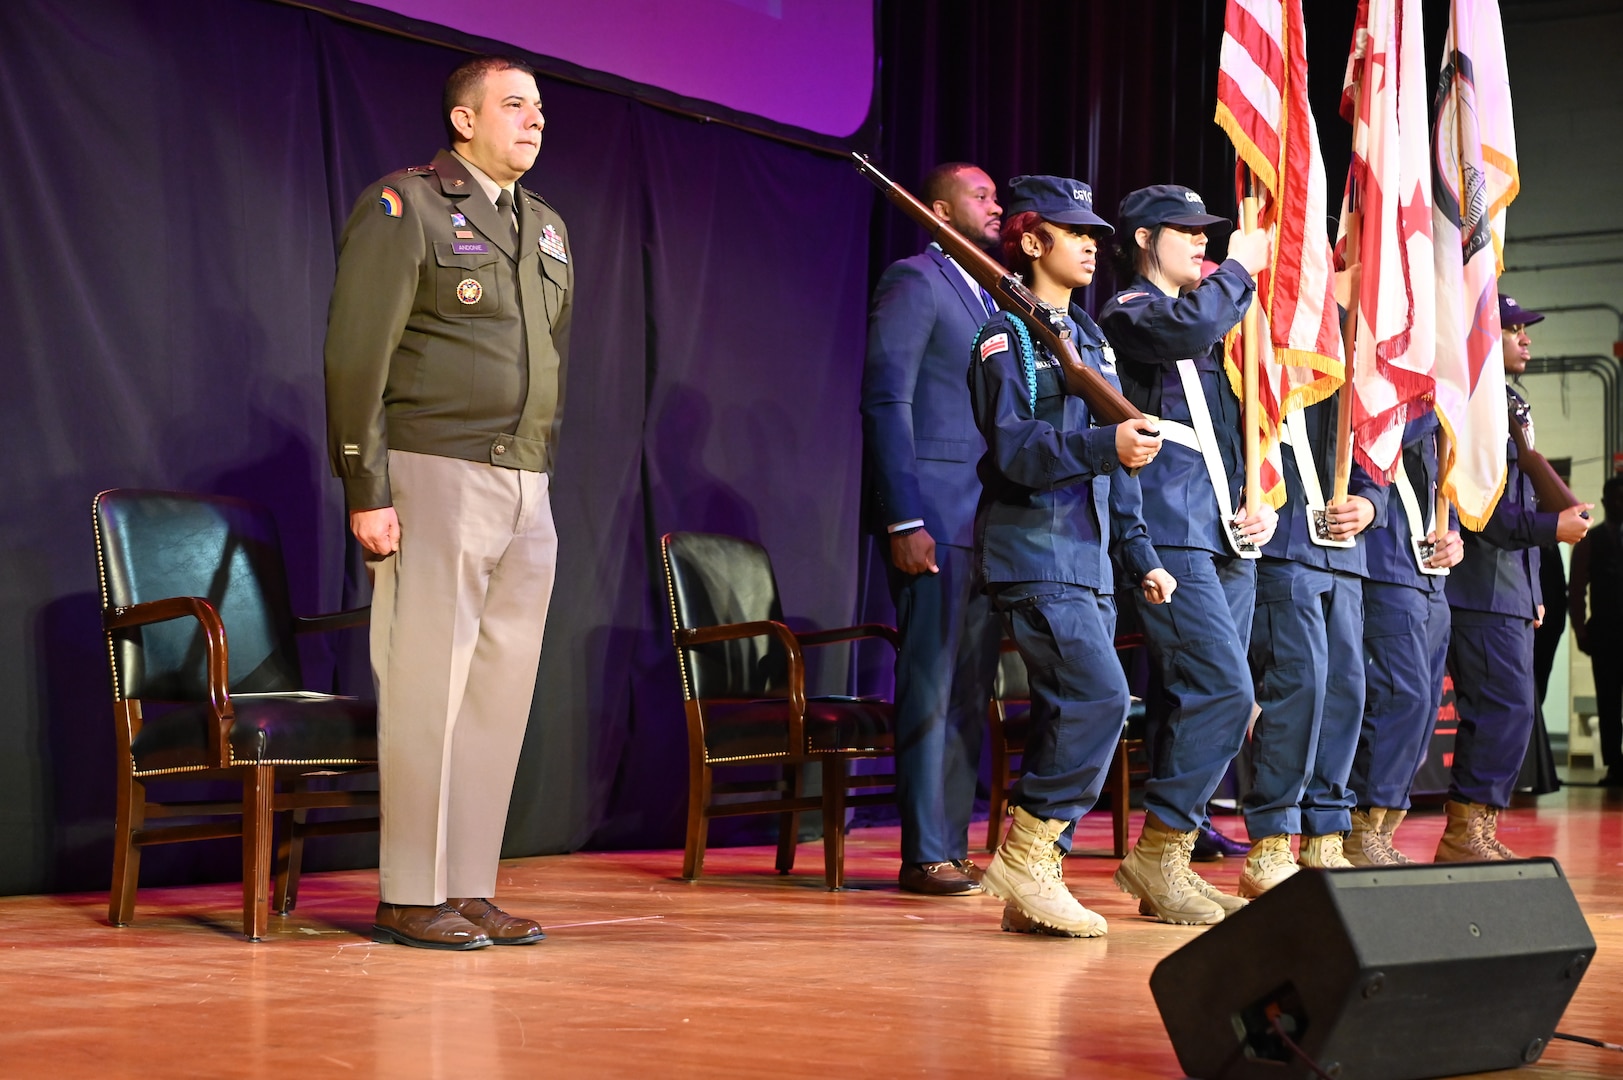 Cadets of the Capital Guardian Youth Challenge Academy Class 61 receive their diplomas upon completion of a 22 week long “quasi-military" course, during a residential phase commencement ceremony at the University of the District of Columbia, Dec. 29, 2023. Since 2013, the mission of the program is to intervene in and reclaim the lives of at-risk youth, and produce program graduates with the values, skills, education, and self-discipline necessary to succeed as adults.